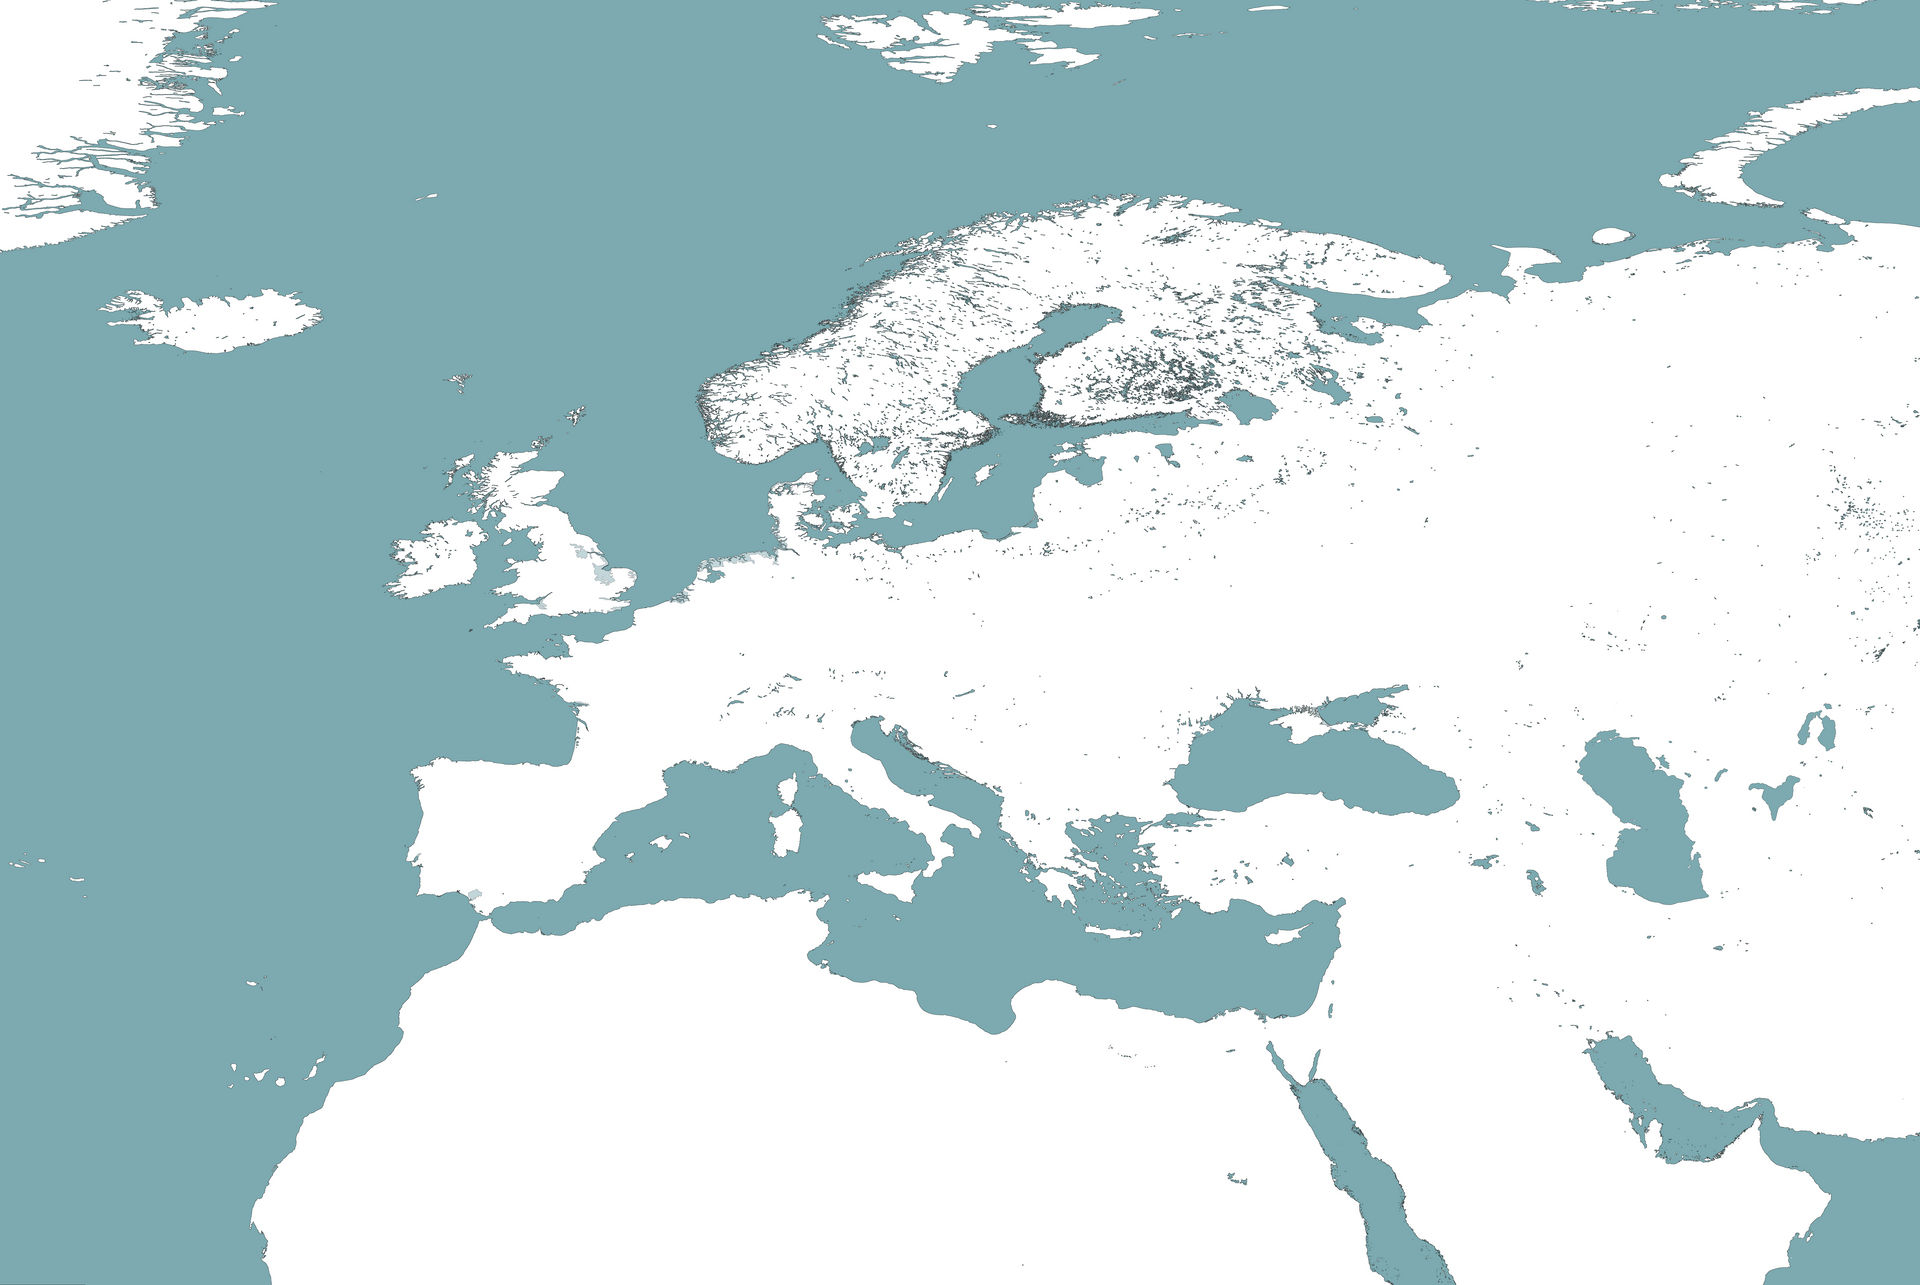 blank_europe_and_mena_coast_at_the_500_800_ad_v0_5_by_trevistio_dh0mz1w-fullview.jpg